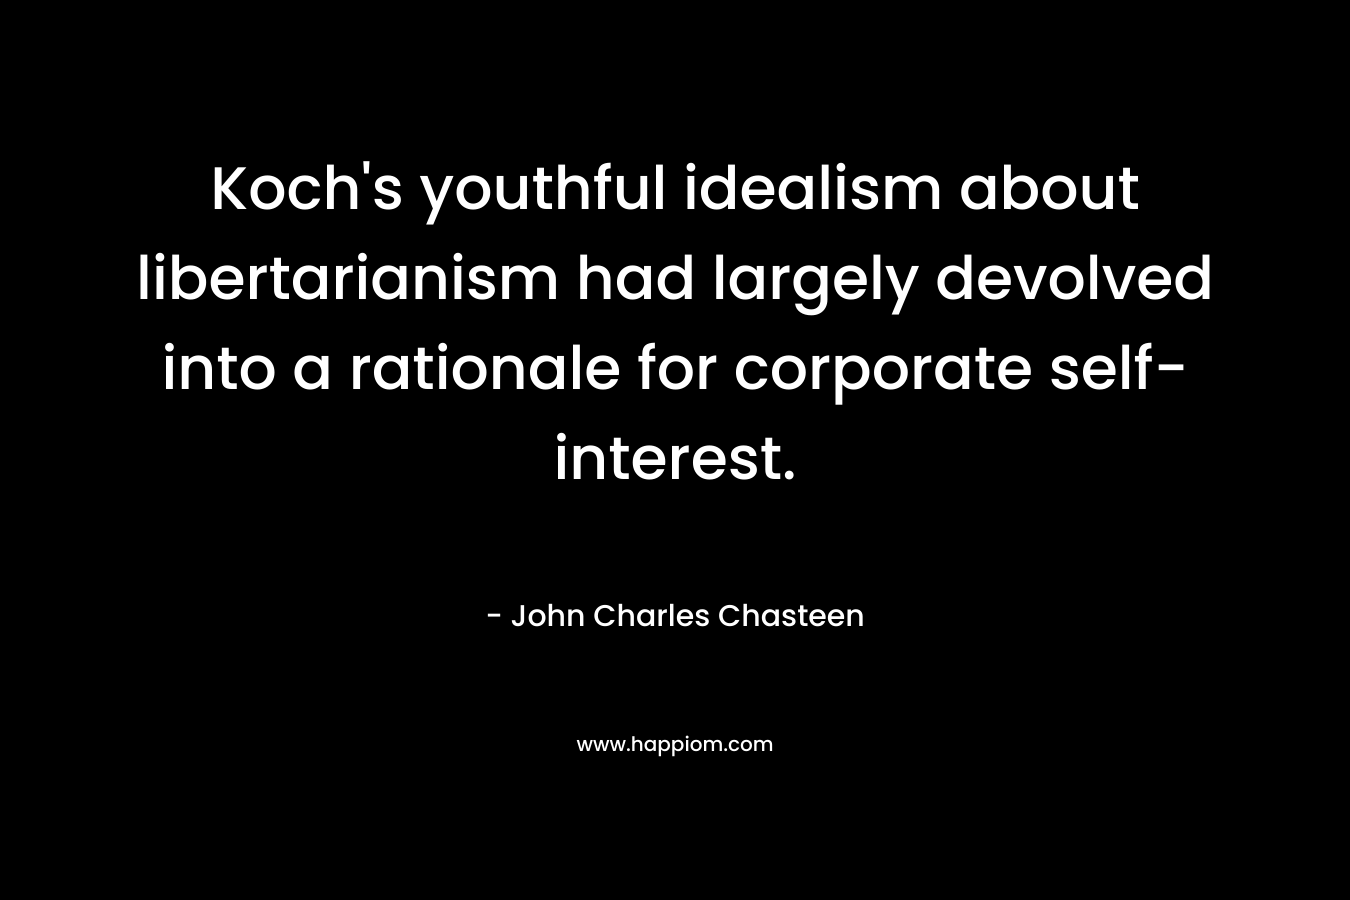 Koch’s youthful idealism about libertarianism had largely devolved into a rationale for corporate self-interest. – John Charles Chasteen